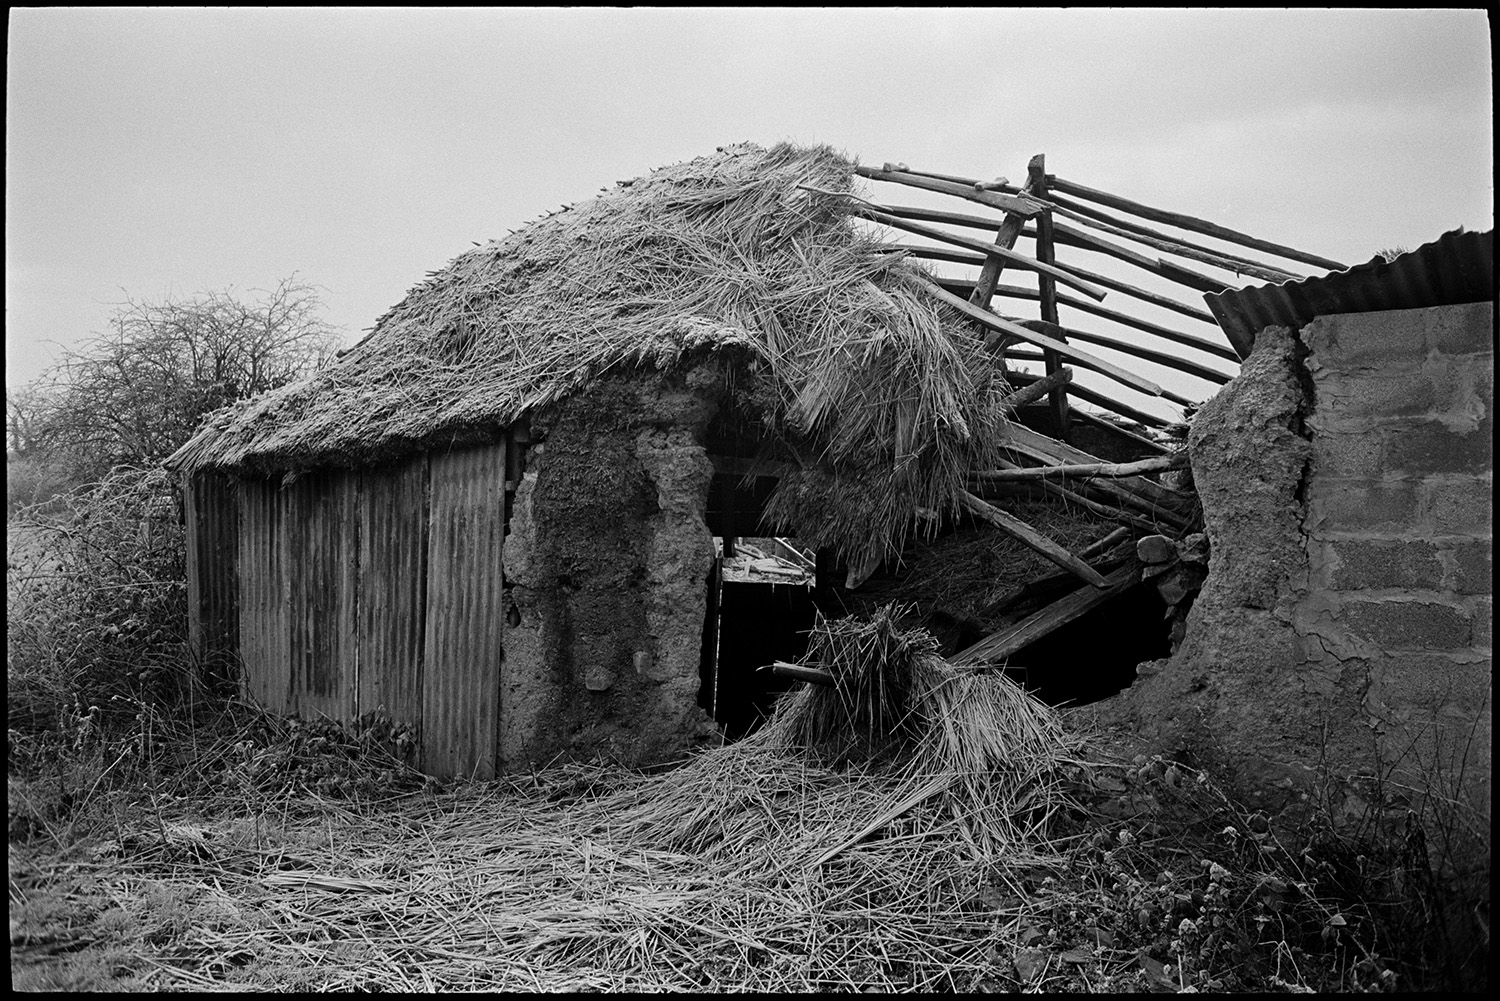 Collapsed cob and thatch barns.
[Collapsed cob and thatch barn with one wall made from sheets of corrugated iron, at Middle Week, Iddesleigh. The roof timbers of the barn are exposed.]